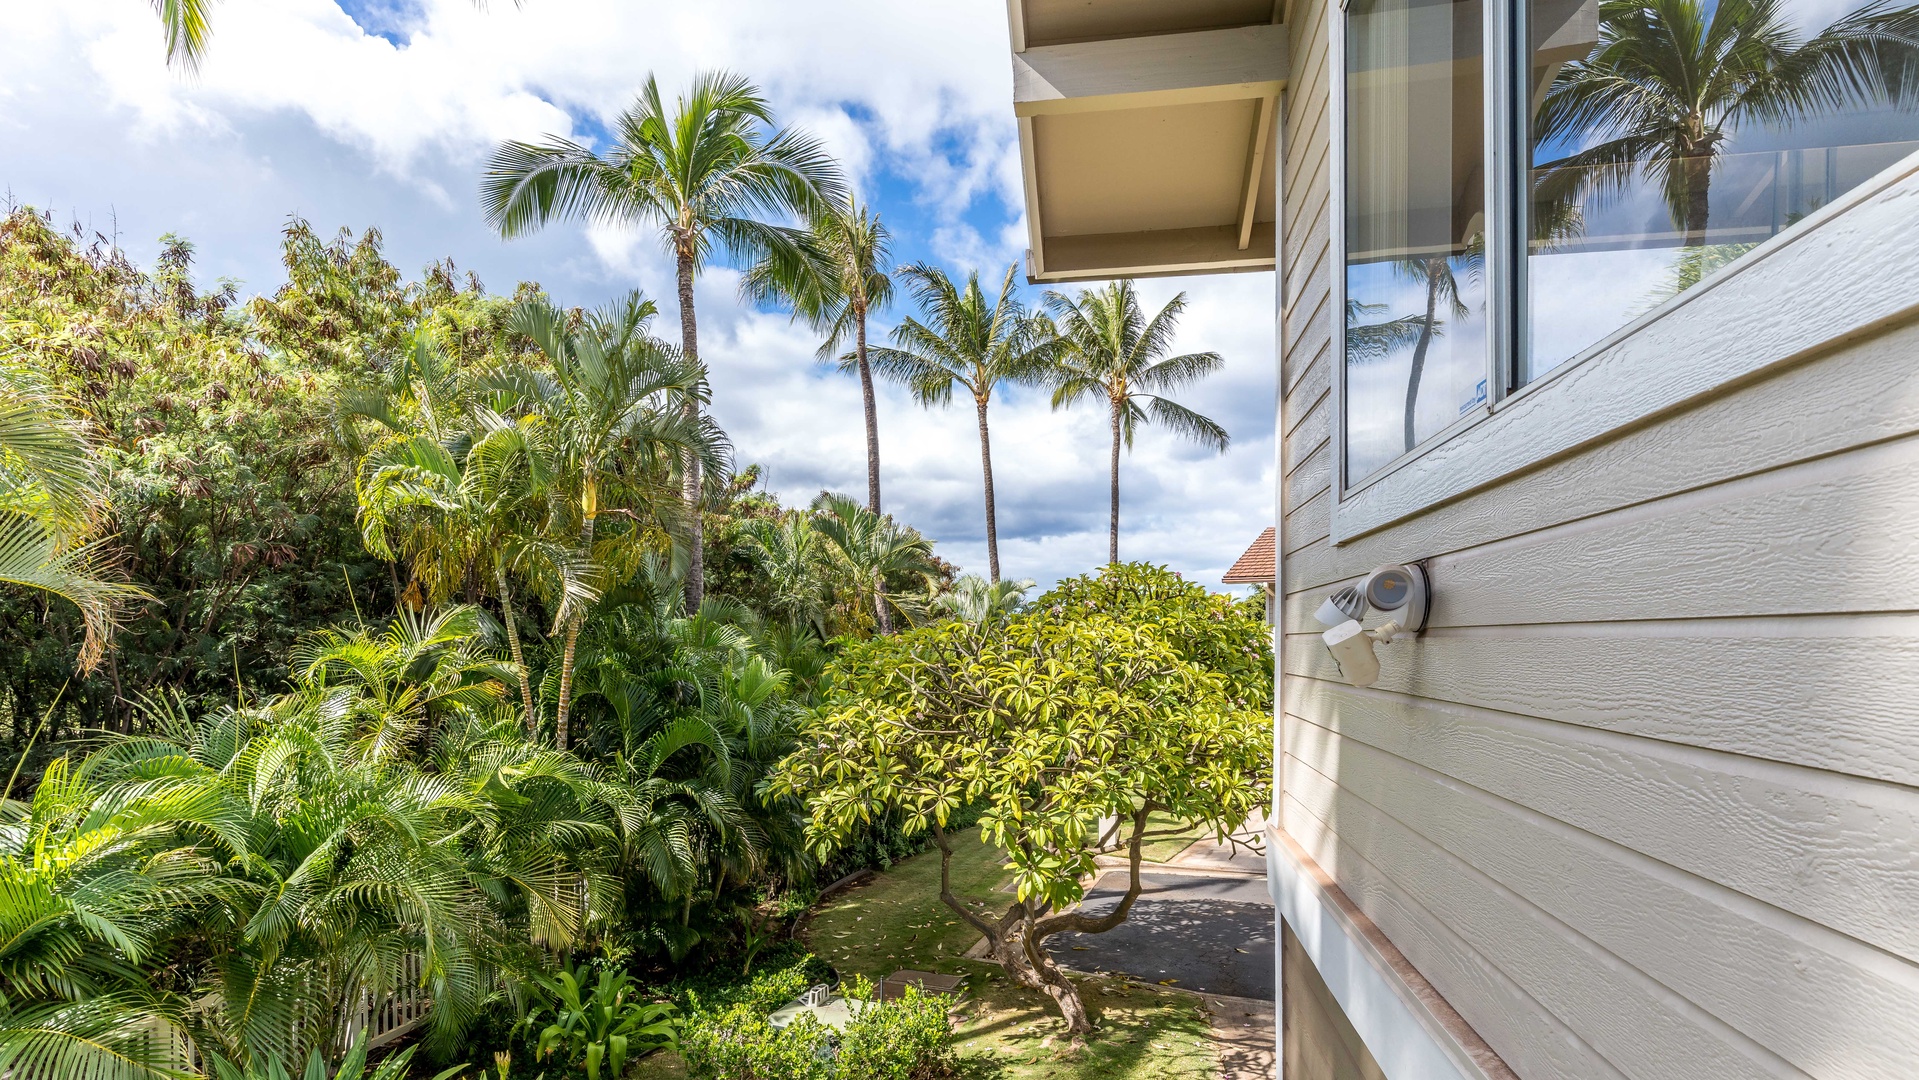 Kapolei Vacation Rentals, Fairways at Ko Olina 4A - A view outside of this charming stay.